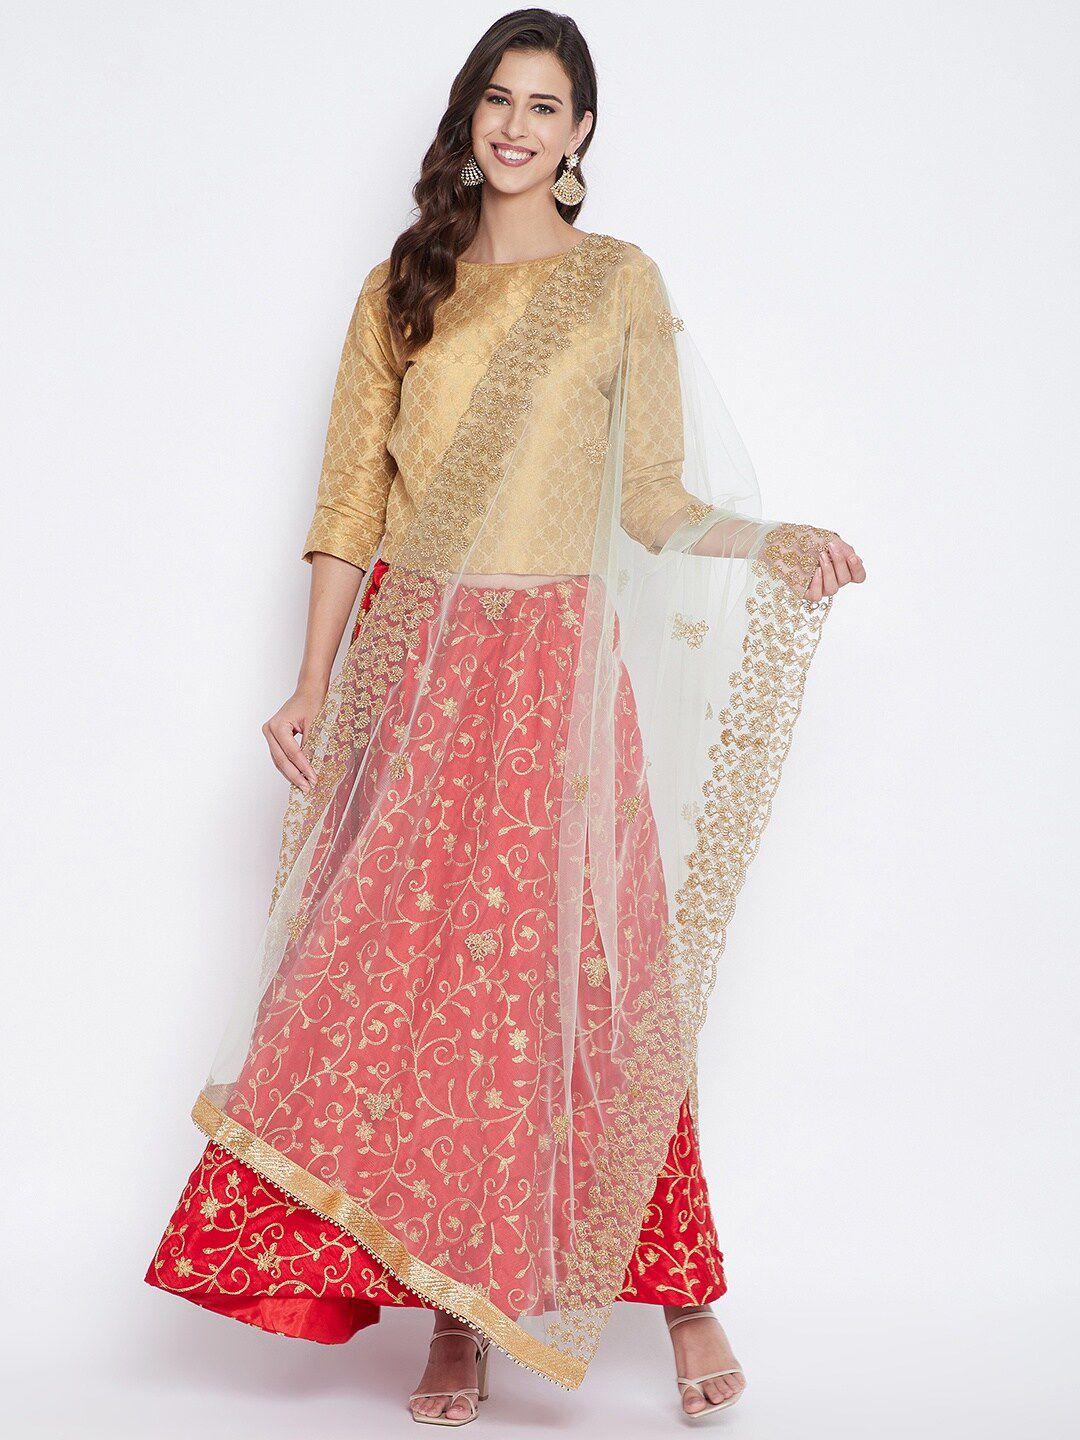 clora-creation-gold-toned-ethnic-motifs-embroidered-dupatta